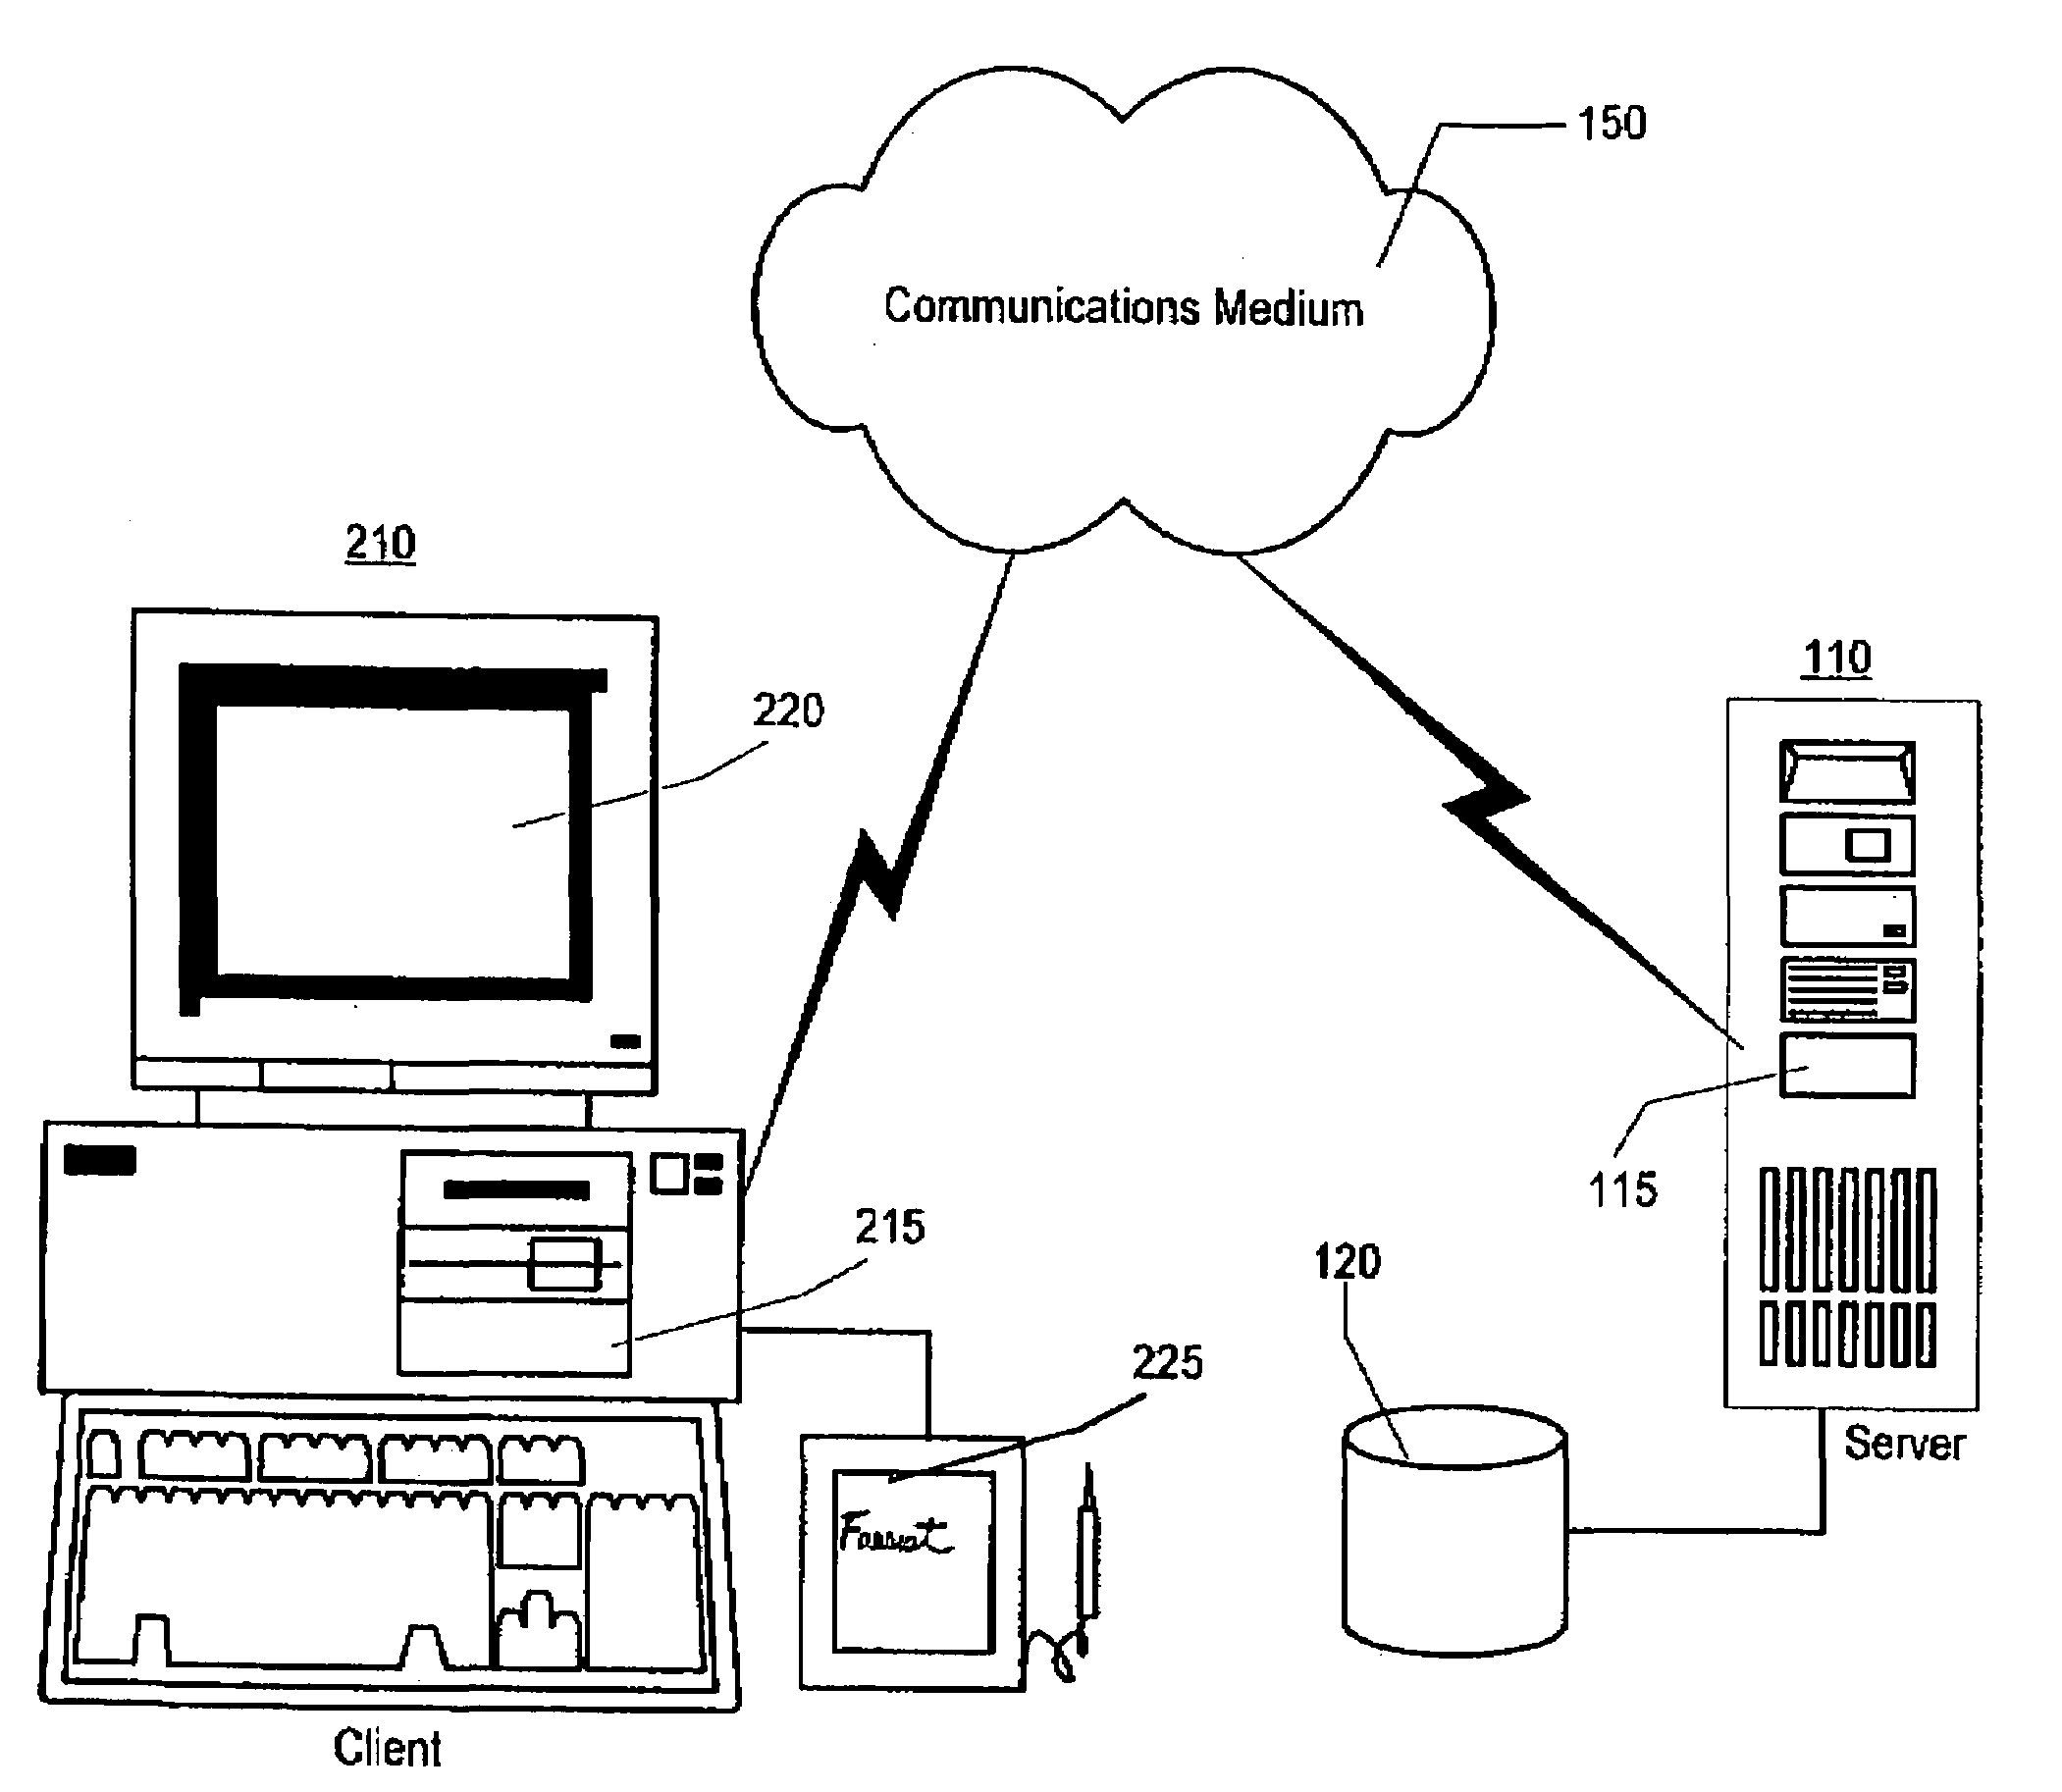 System and method for preparing, executing, and securely managing electronic documents